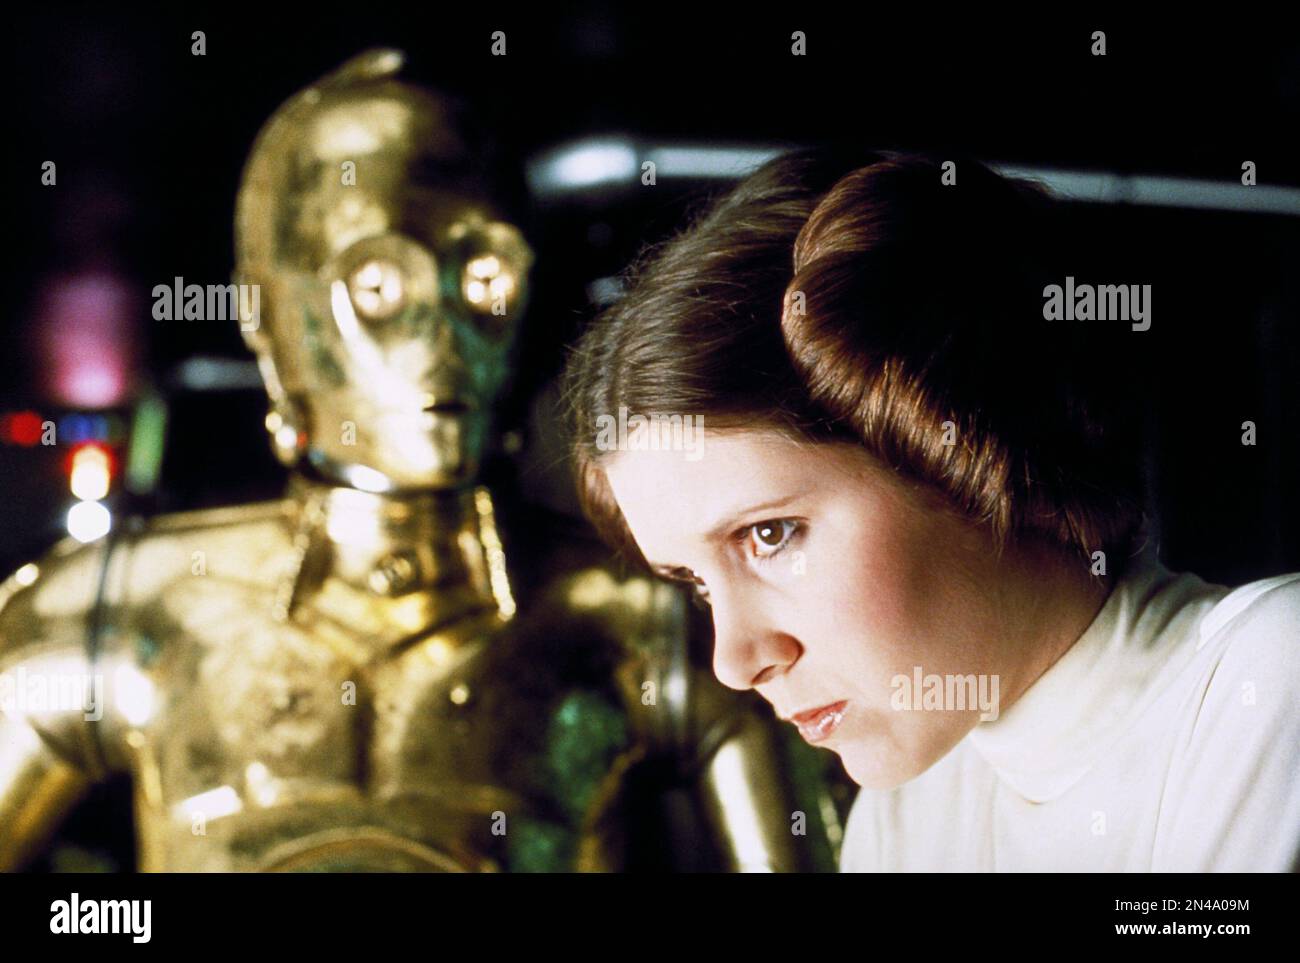 Star Wars Carrie Fisher Foto Stock